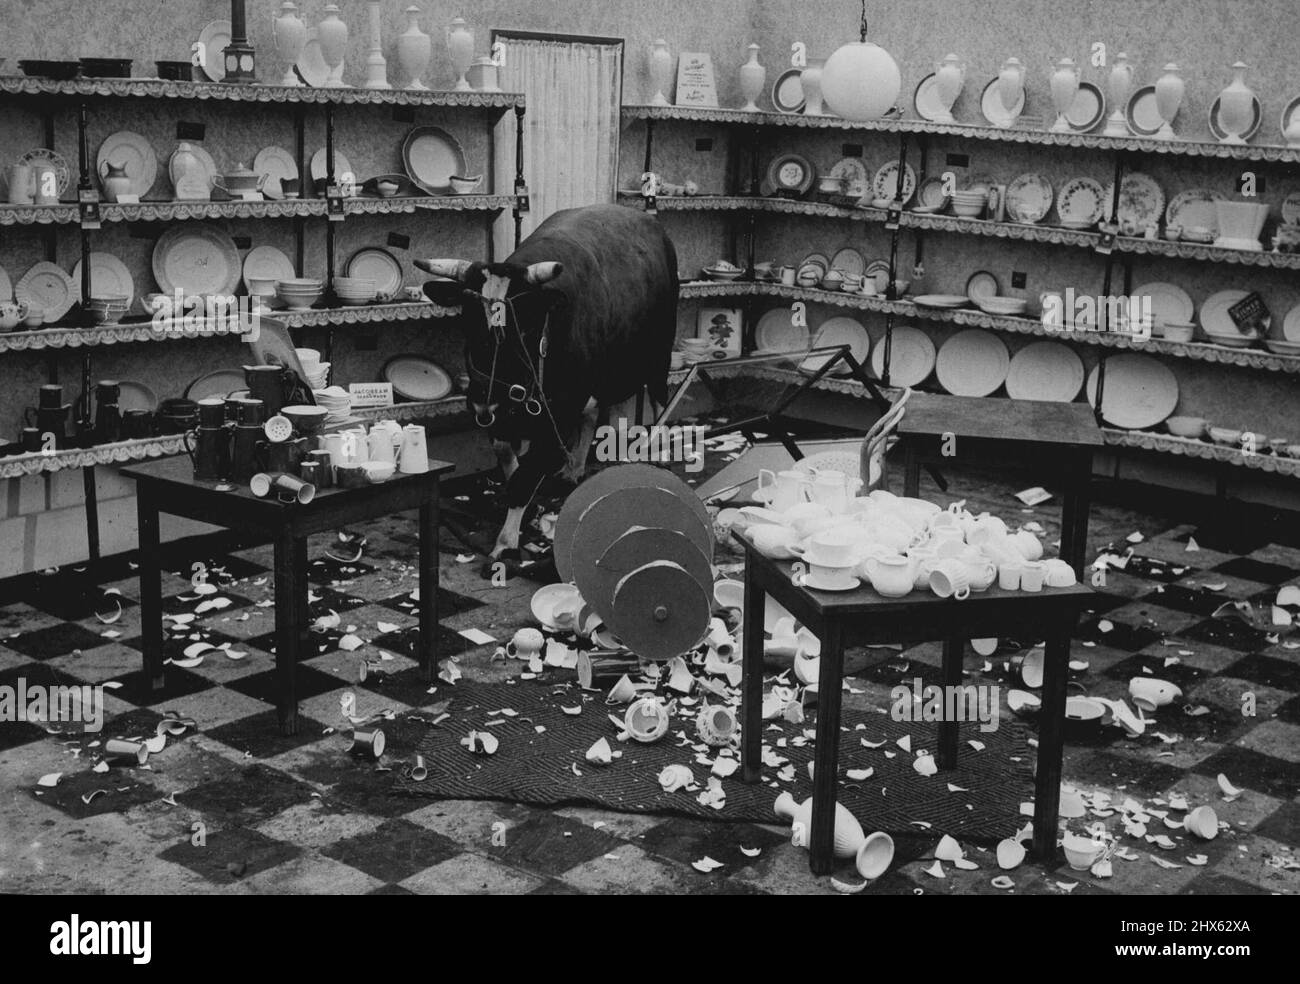 Generic Bull in a China shop. July 27, 1950. (Photo by Daily Mail Contact Picture). Stock Photo